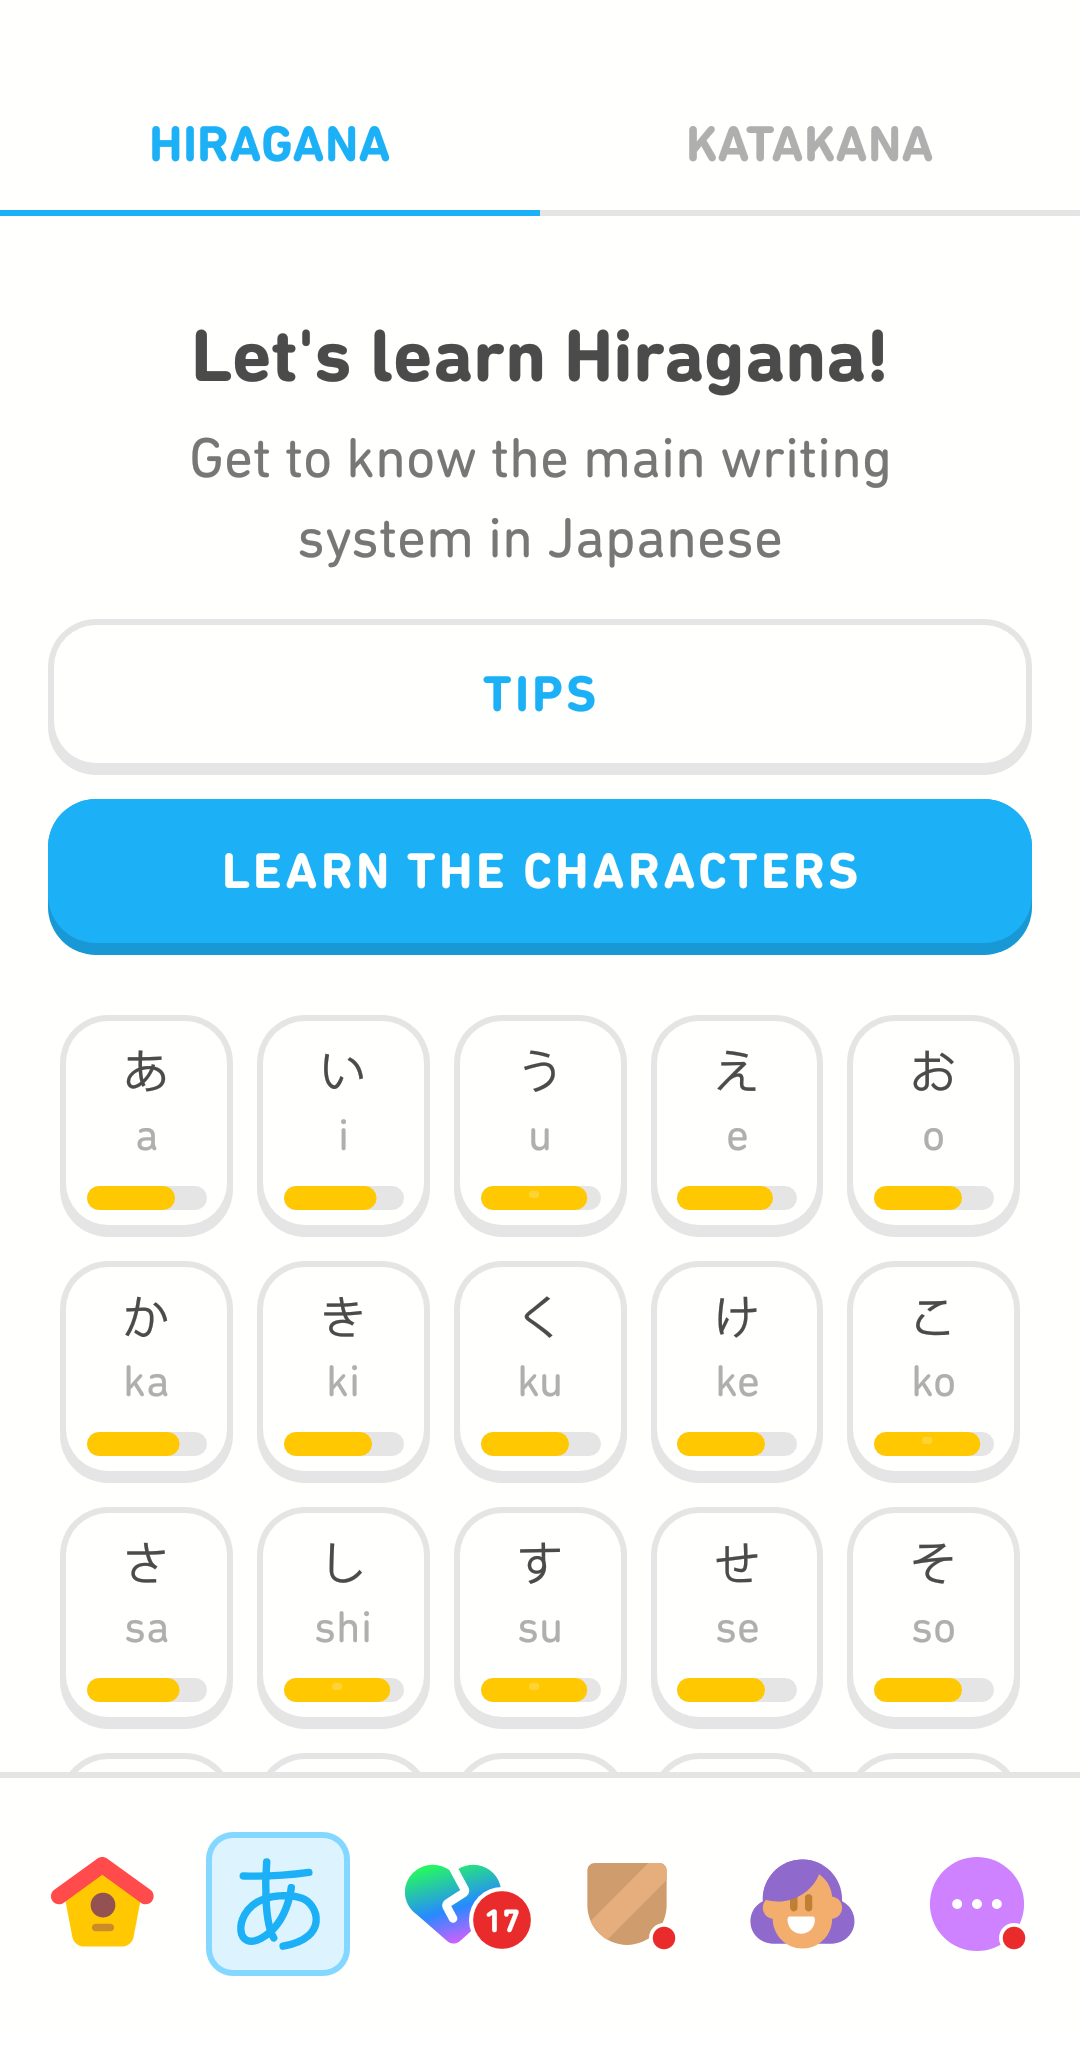 When Do You Use the Three Japanese Writing Systems?